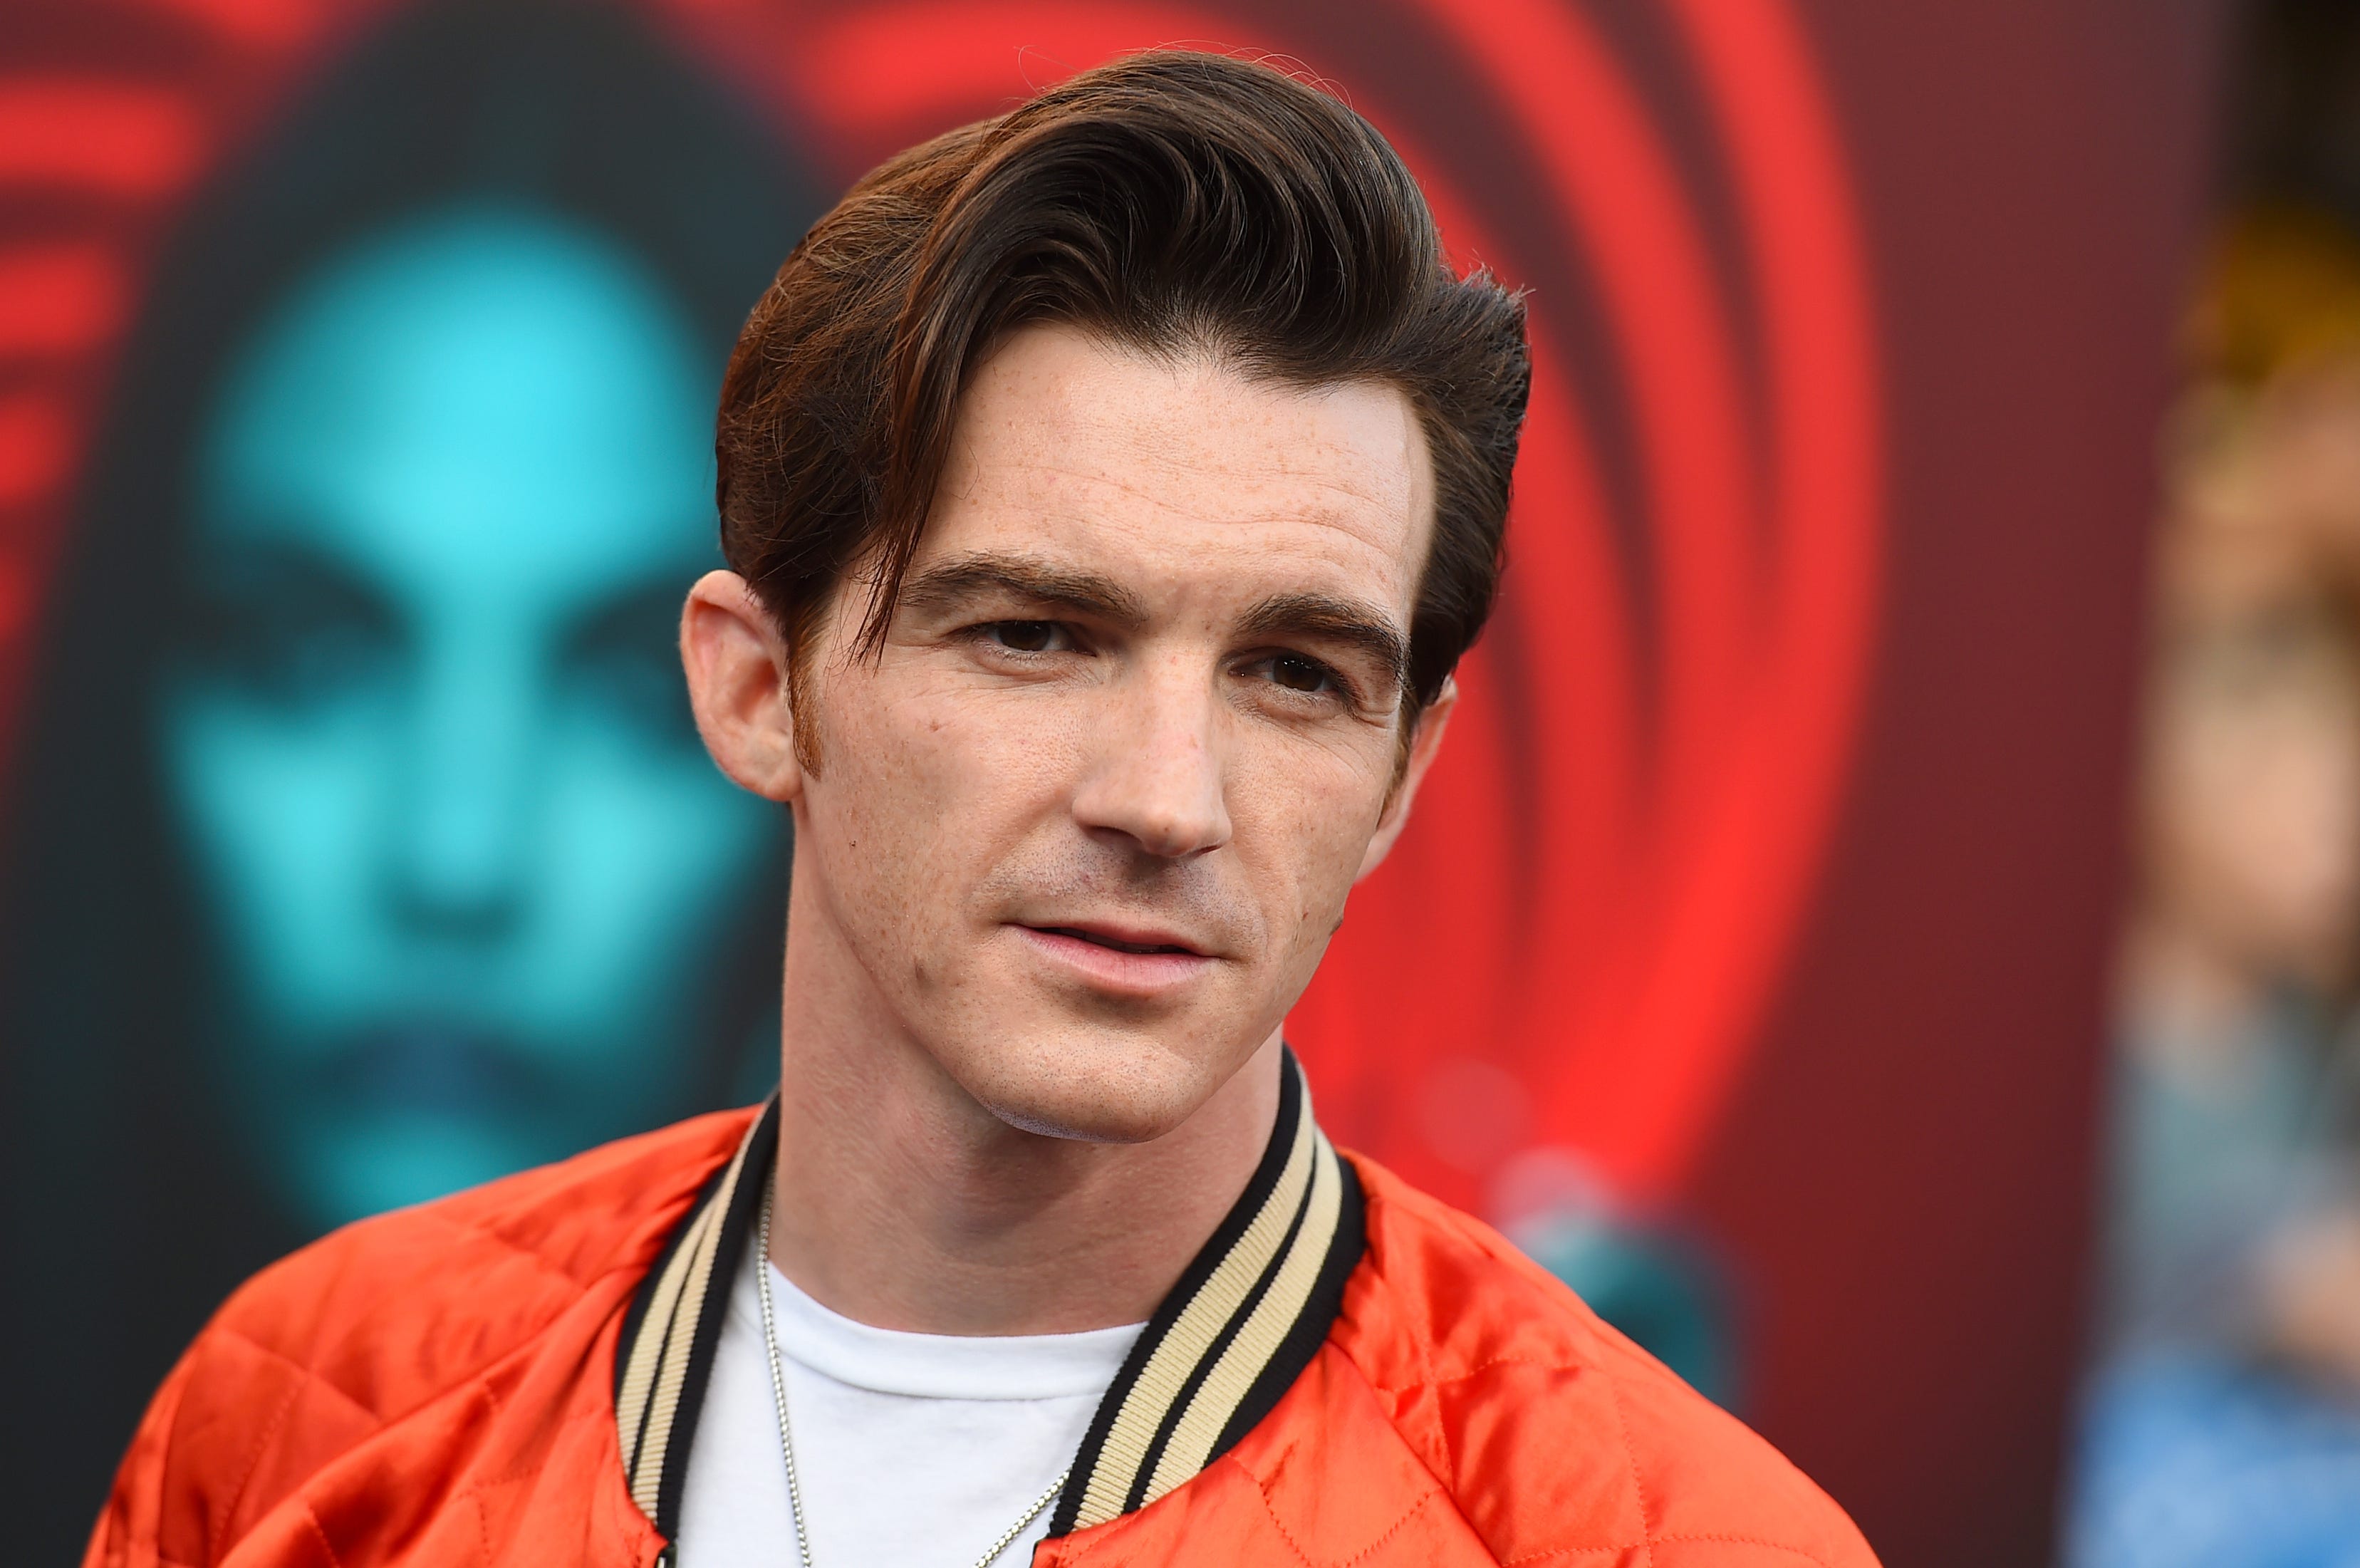 drake bell maintains innocence in child endangerment case, says he pleaded guilty due to finances